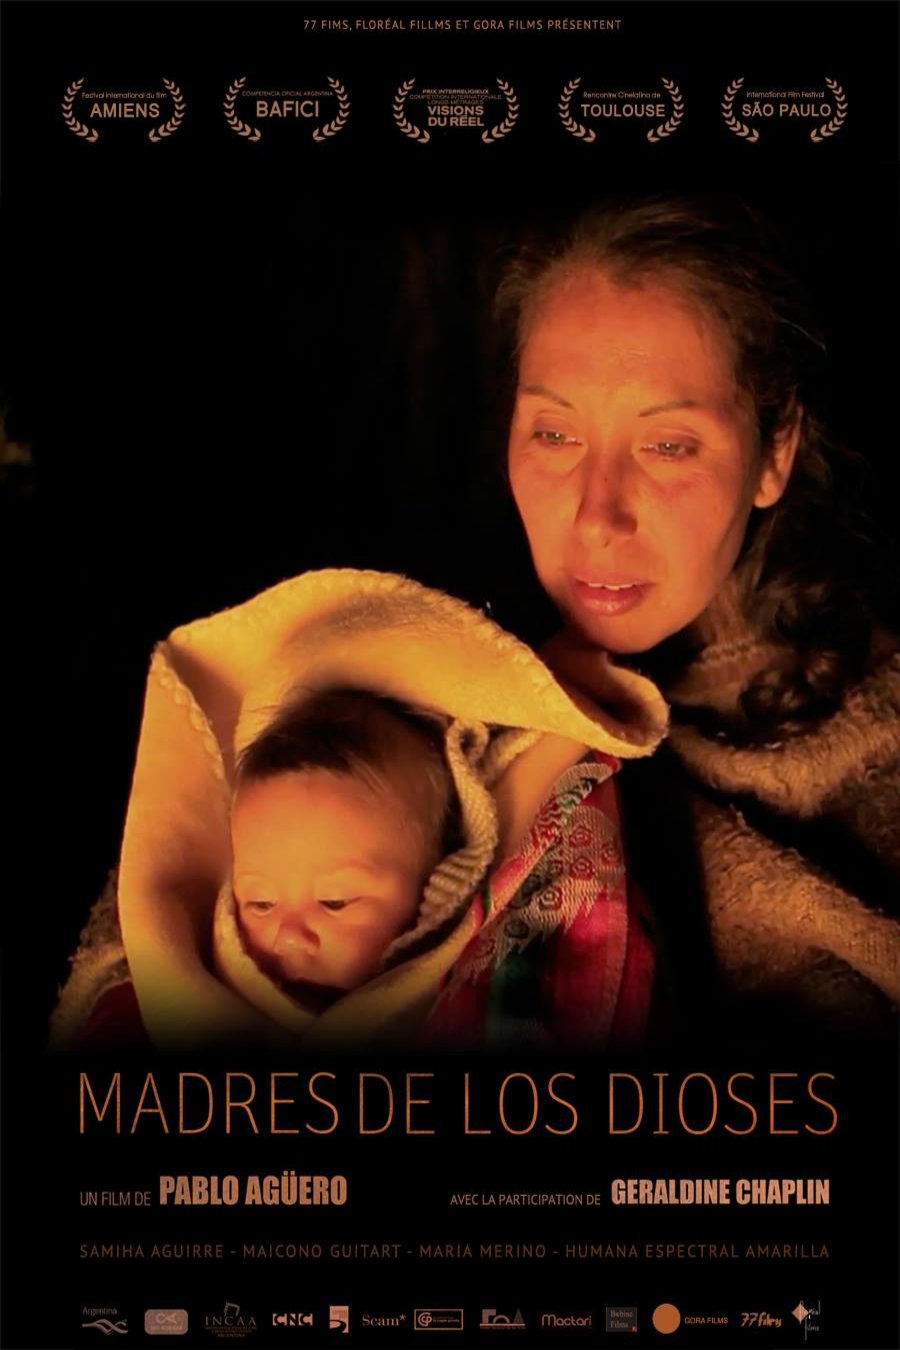 Spanish poster of the movie Madres de los dioses